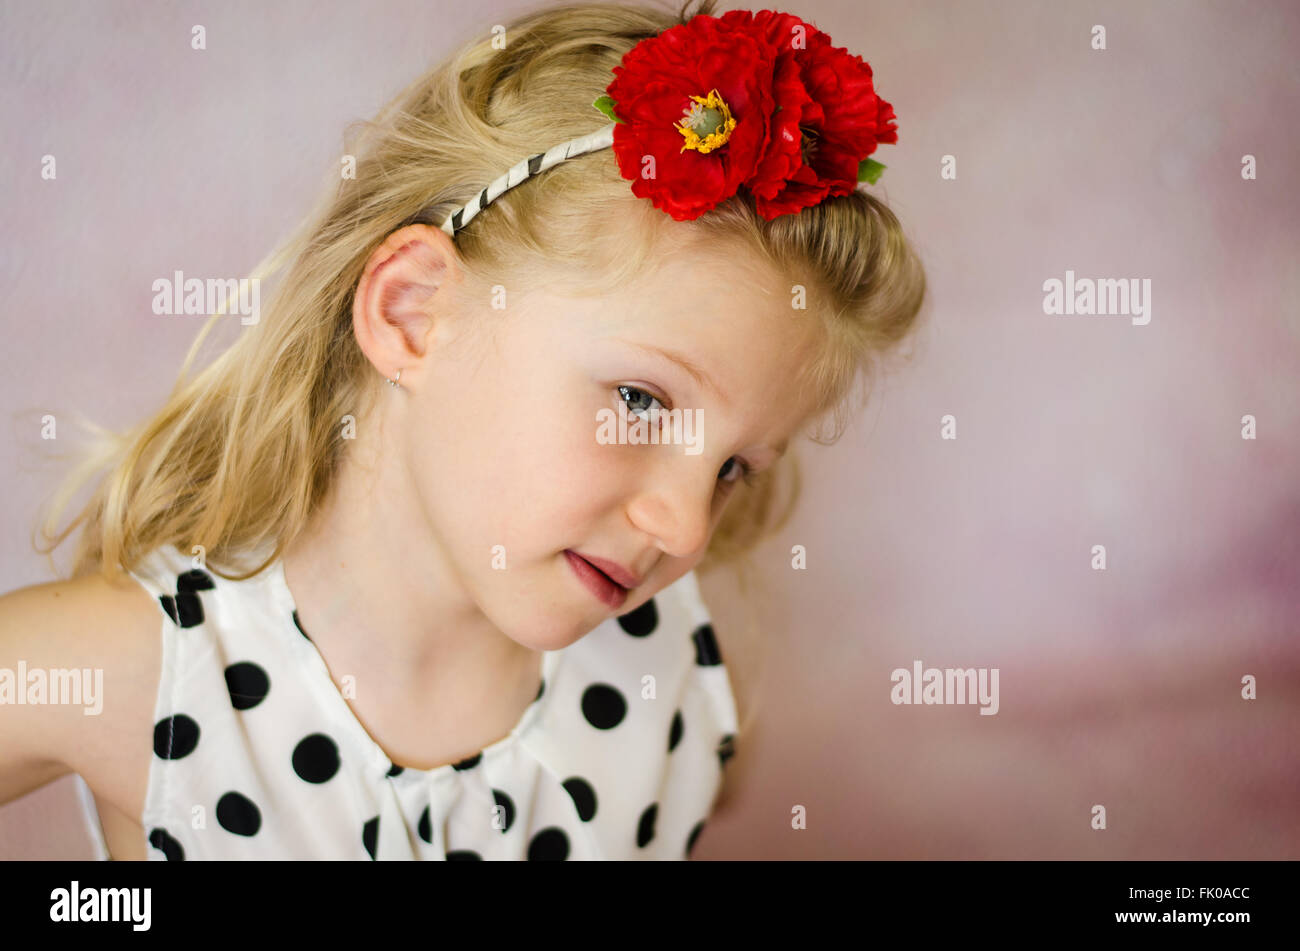 portrait of girl with corn rose in hair Stock Photo